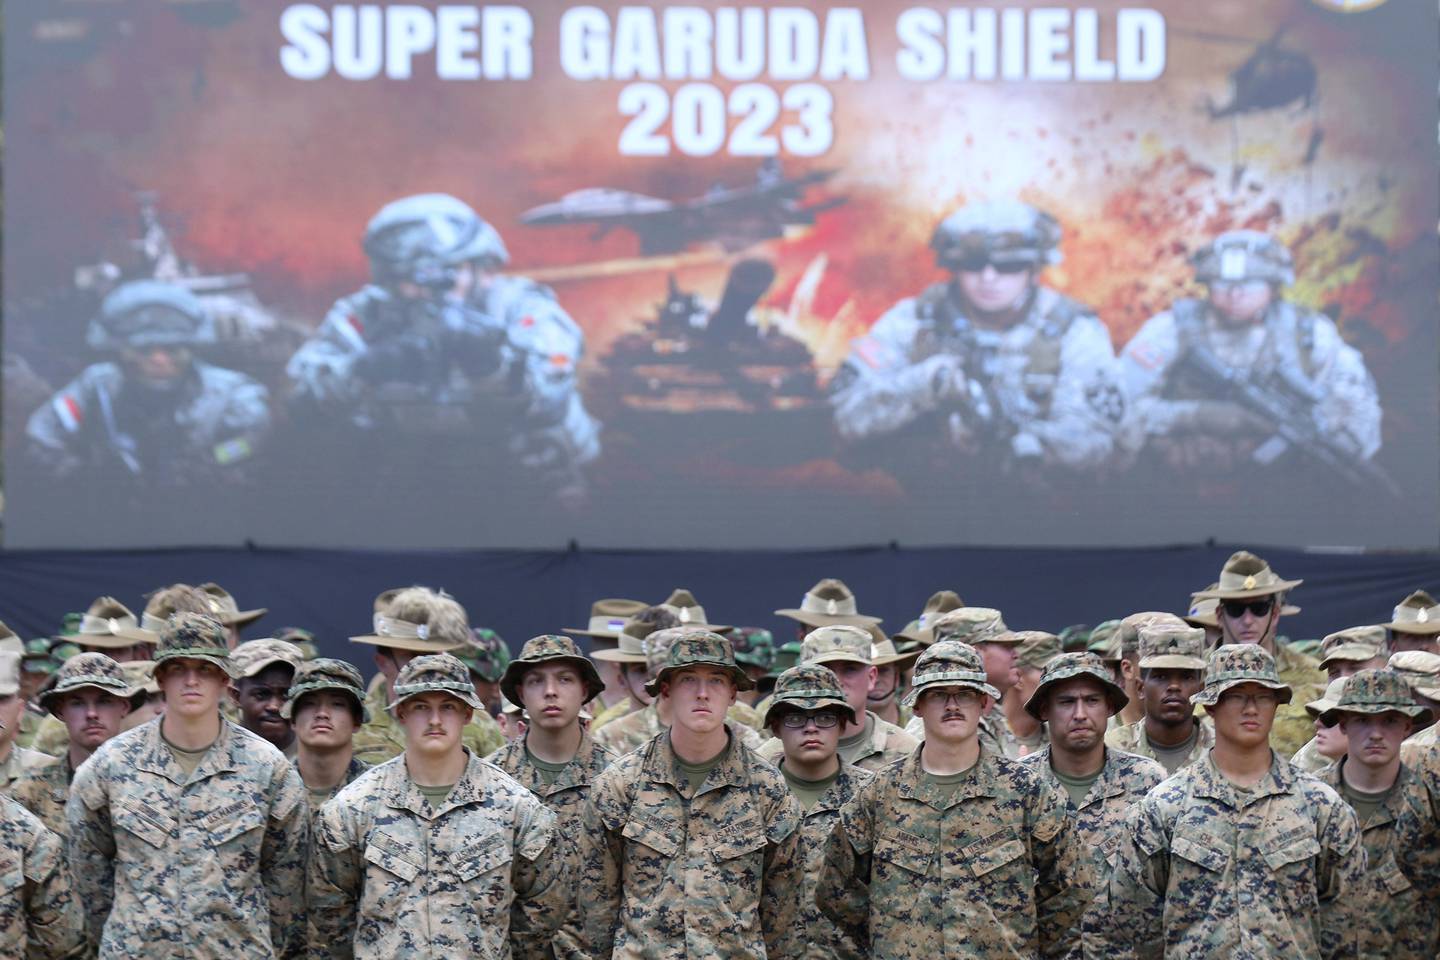 U.S. Marines attend the opening ceremony of Super Garuda Shield 2023 in Baluran, East Java, Indonesia, Thursday, Aug. 31, 2023.